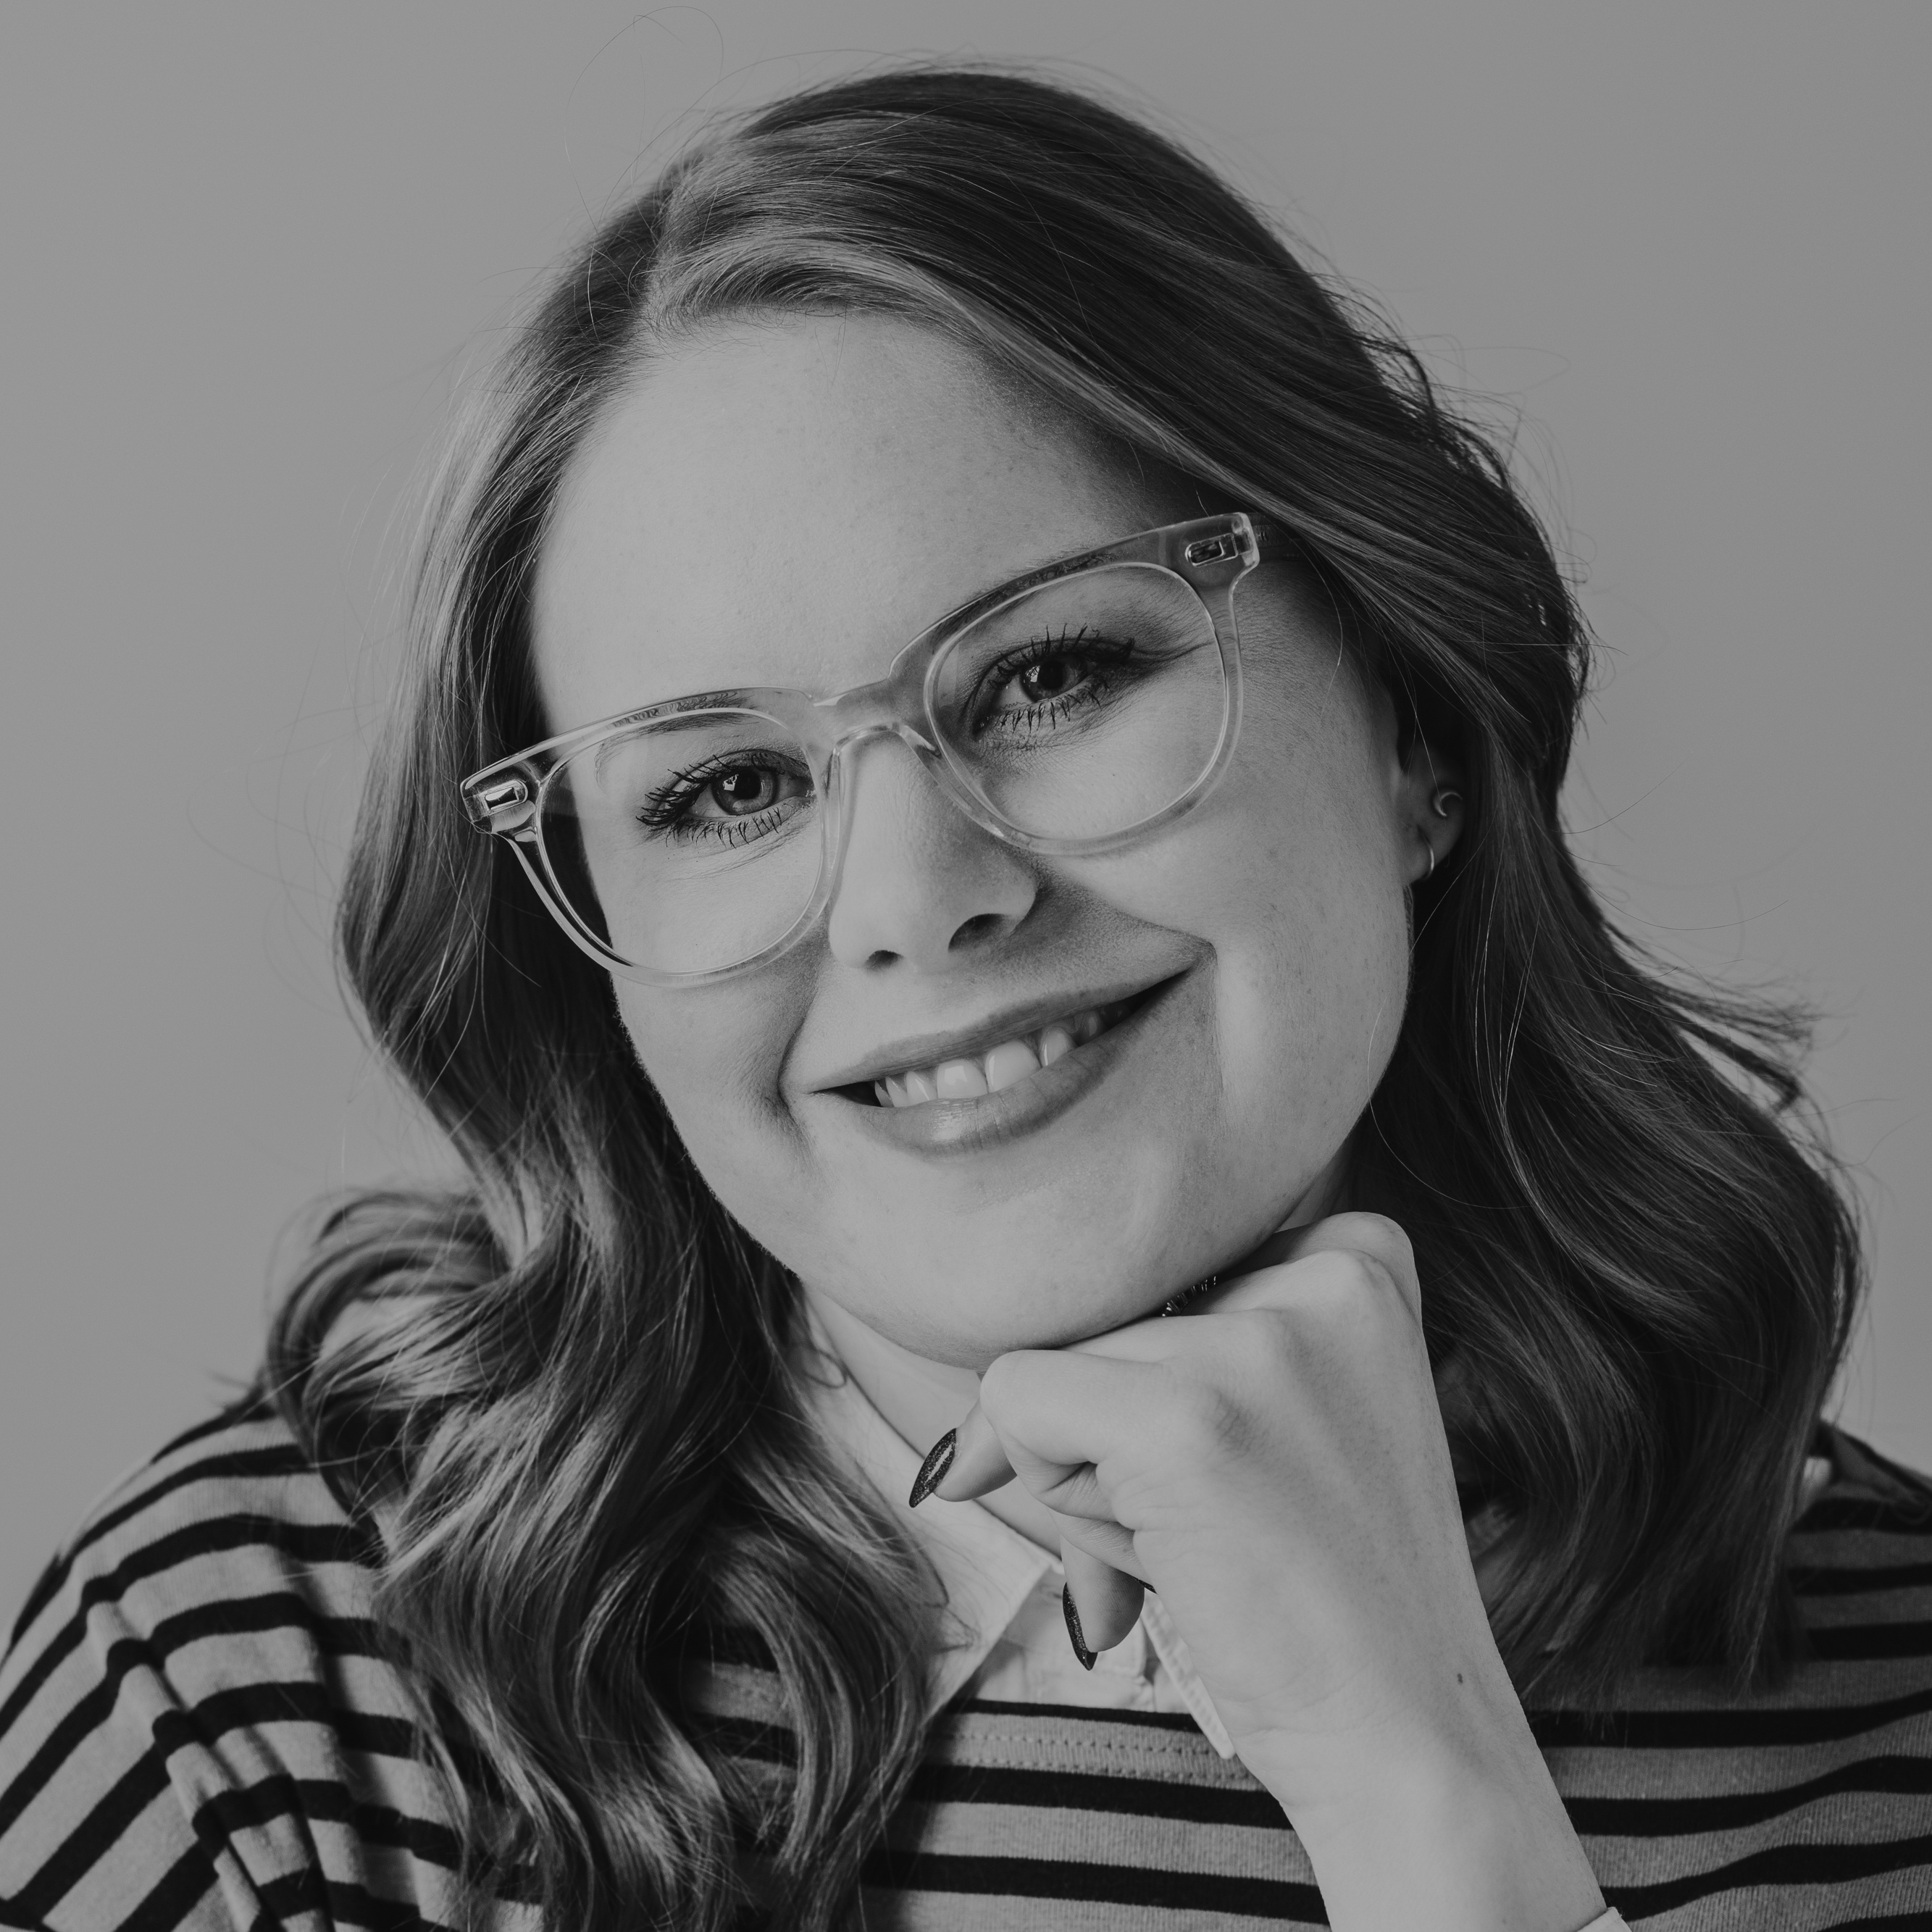 A greyscale image of a person wearing glasses. They have long hair parted in the centre and wear glasses, Their chin rests on their hand and they are wearing a striped top